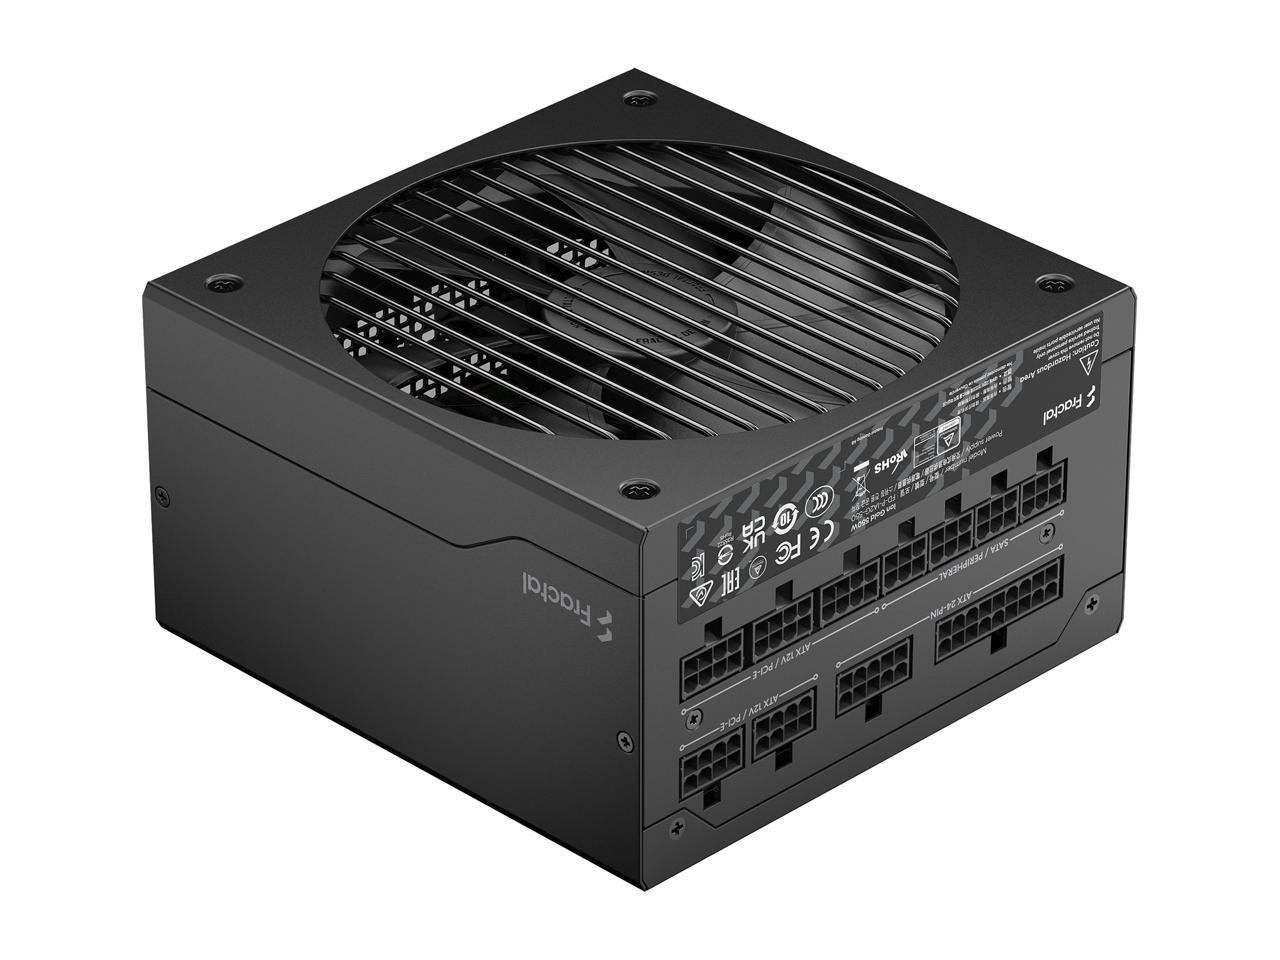 Fractal Design Ion Gold 550W 80 PLUS Gold Certified Fully Modular ATX Power Supply